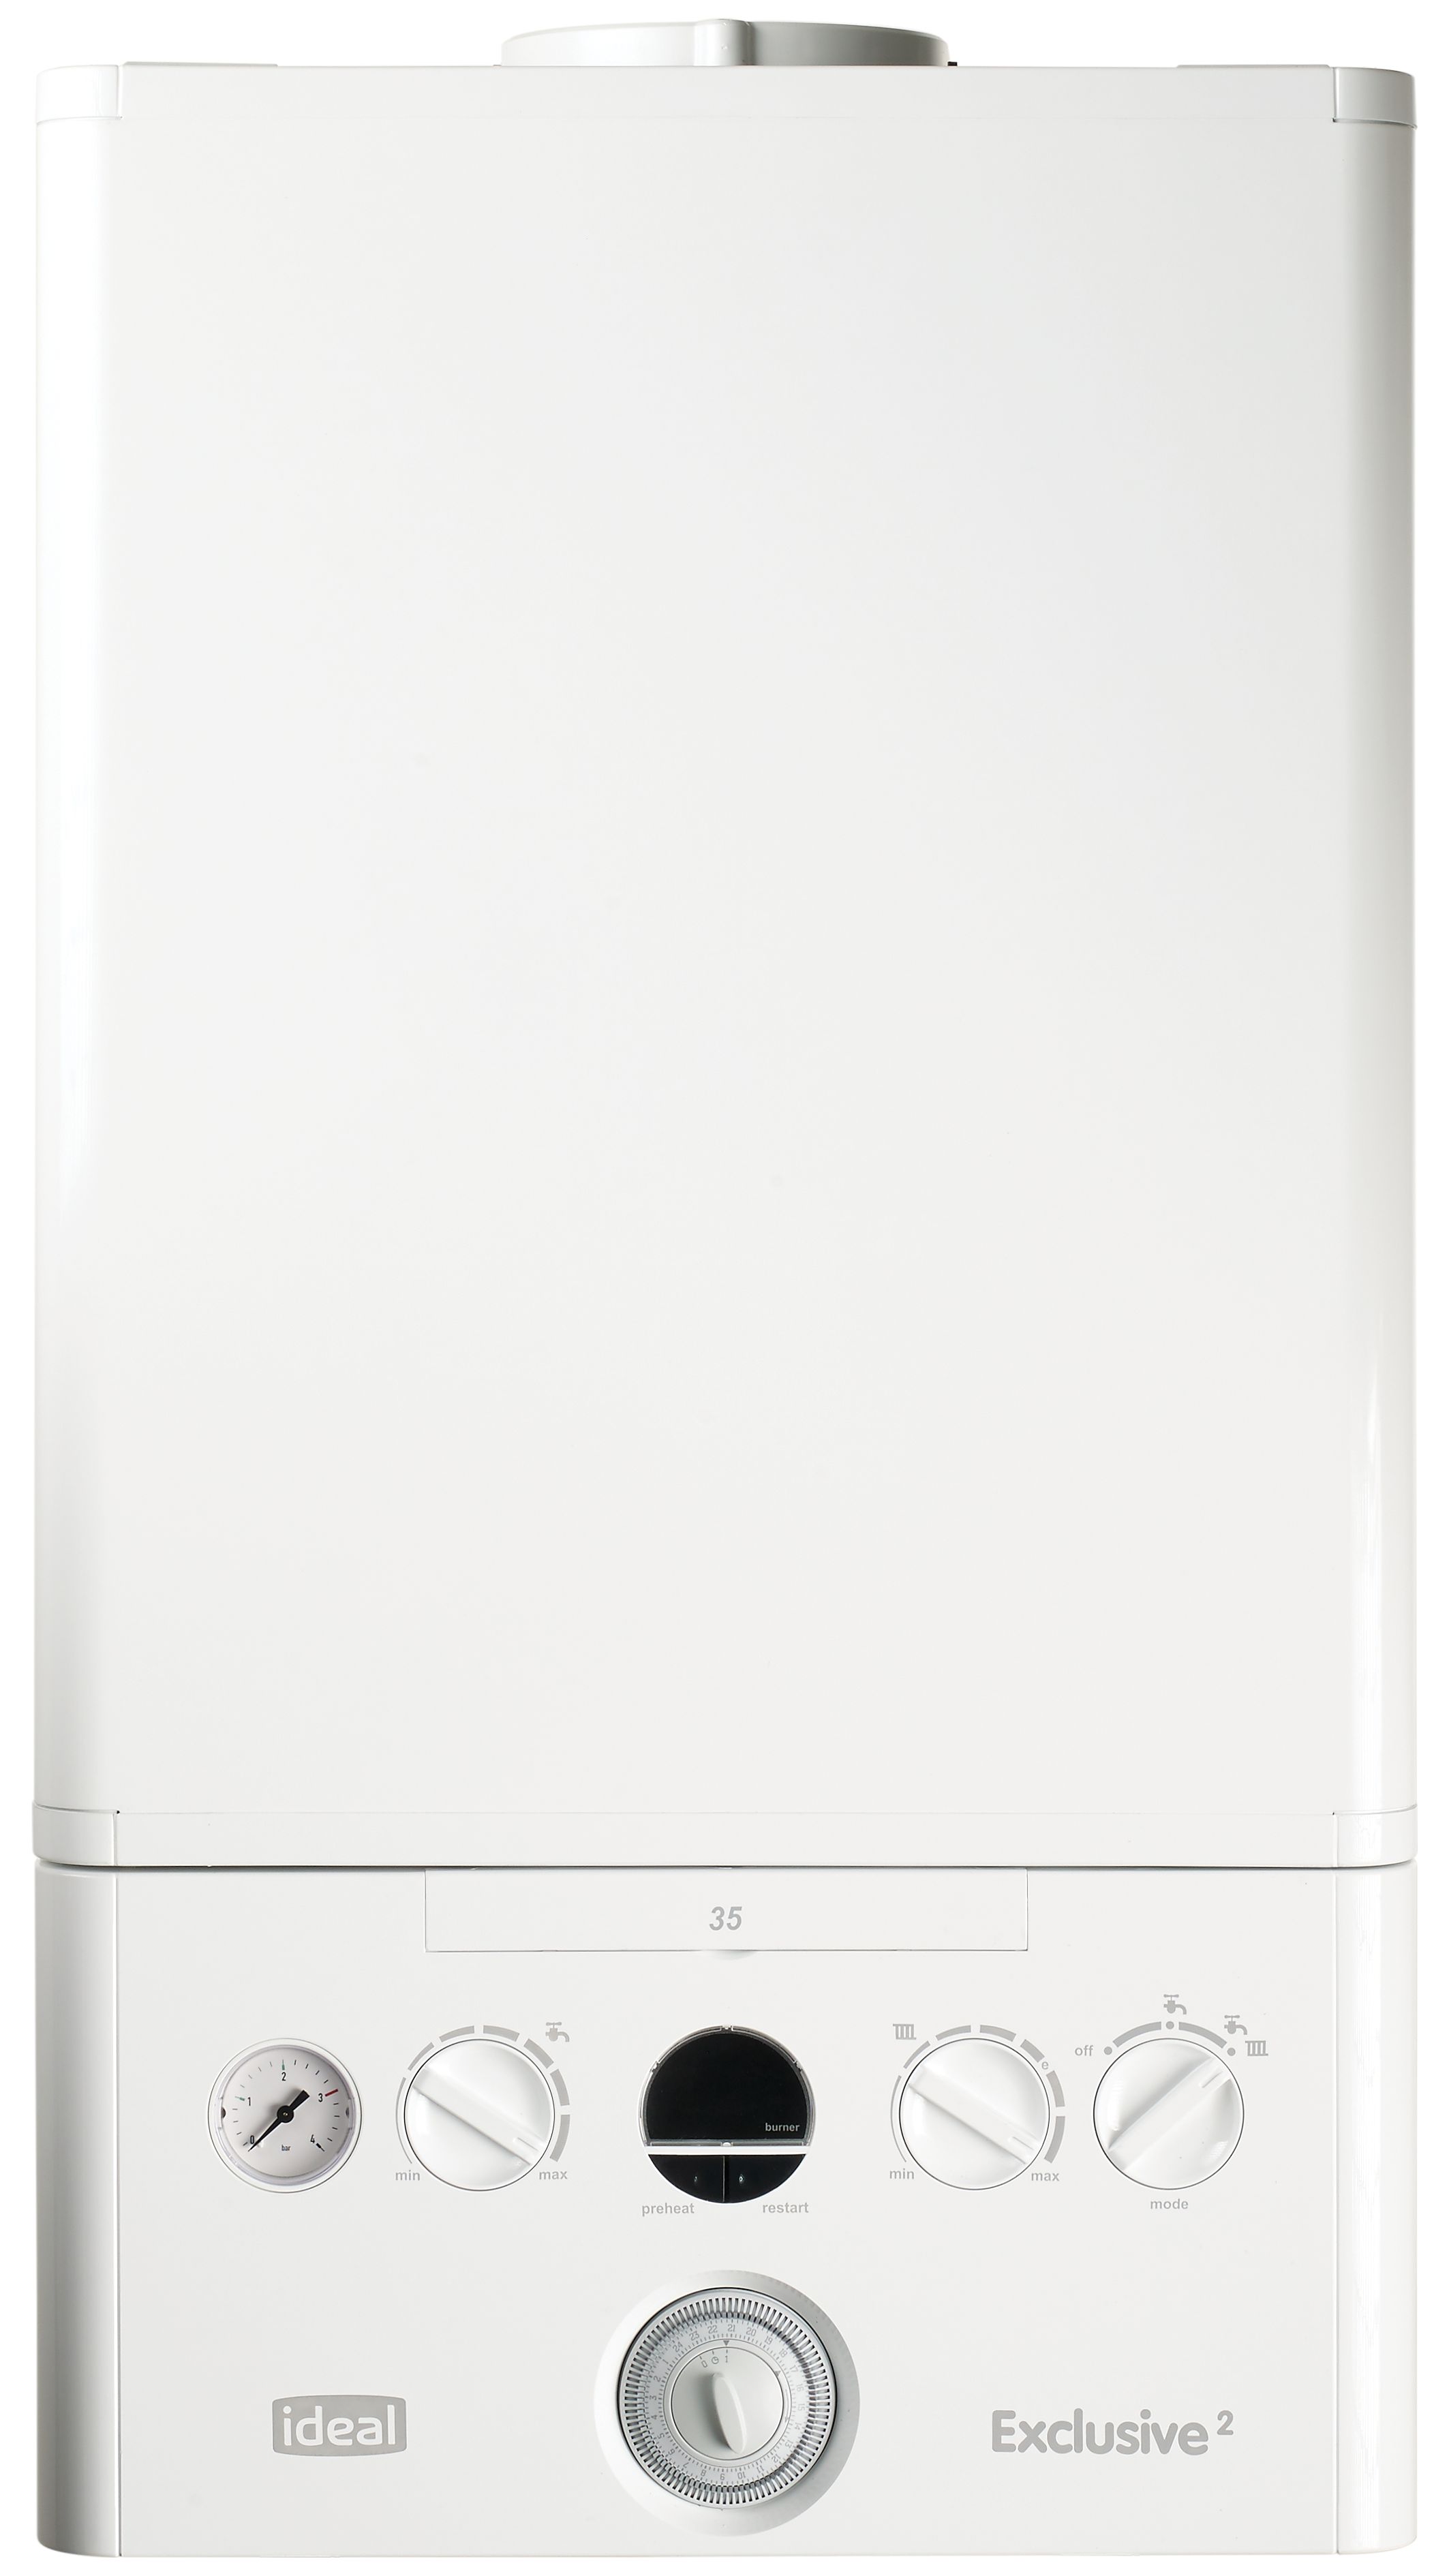 Image of Ideal Exclusive 2 Combi Boiler Only - 24kW